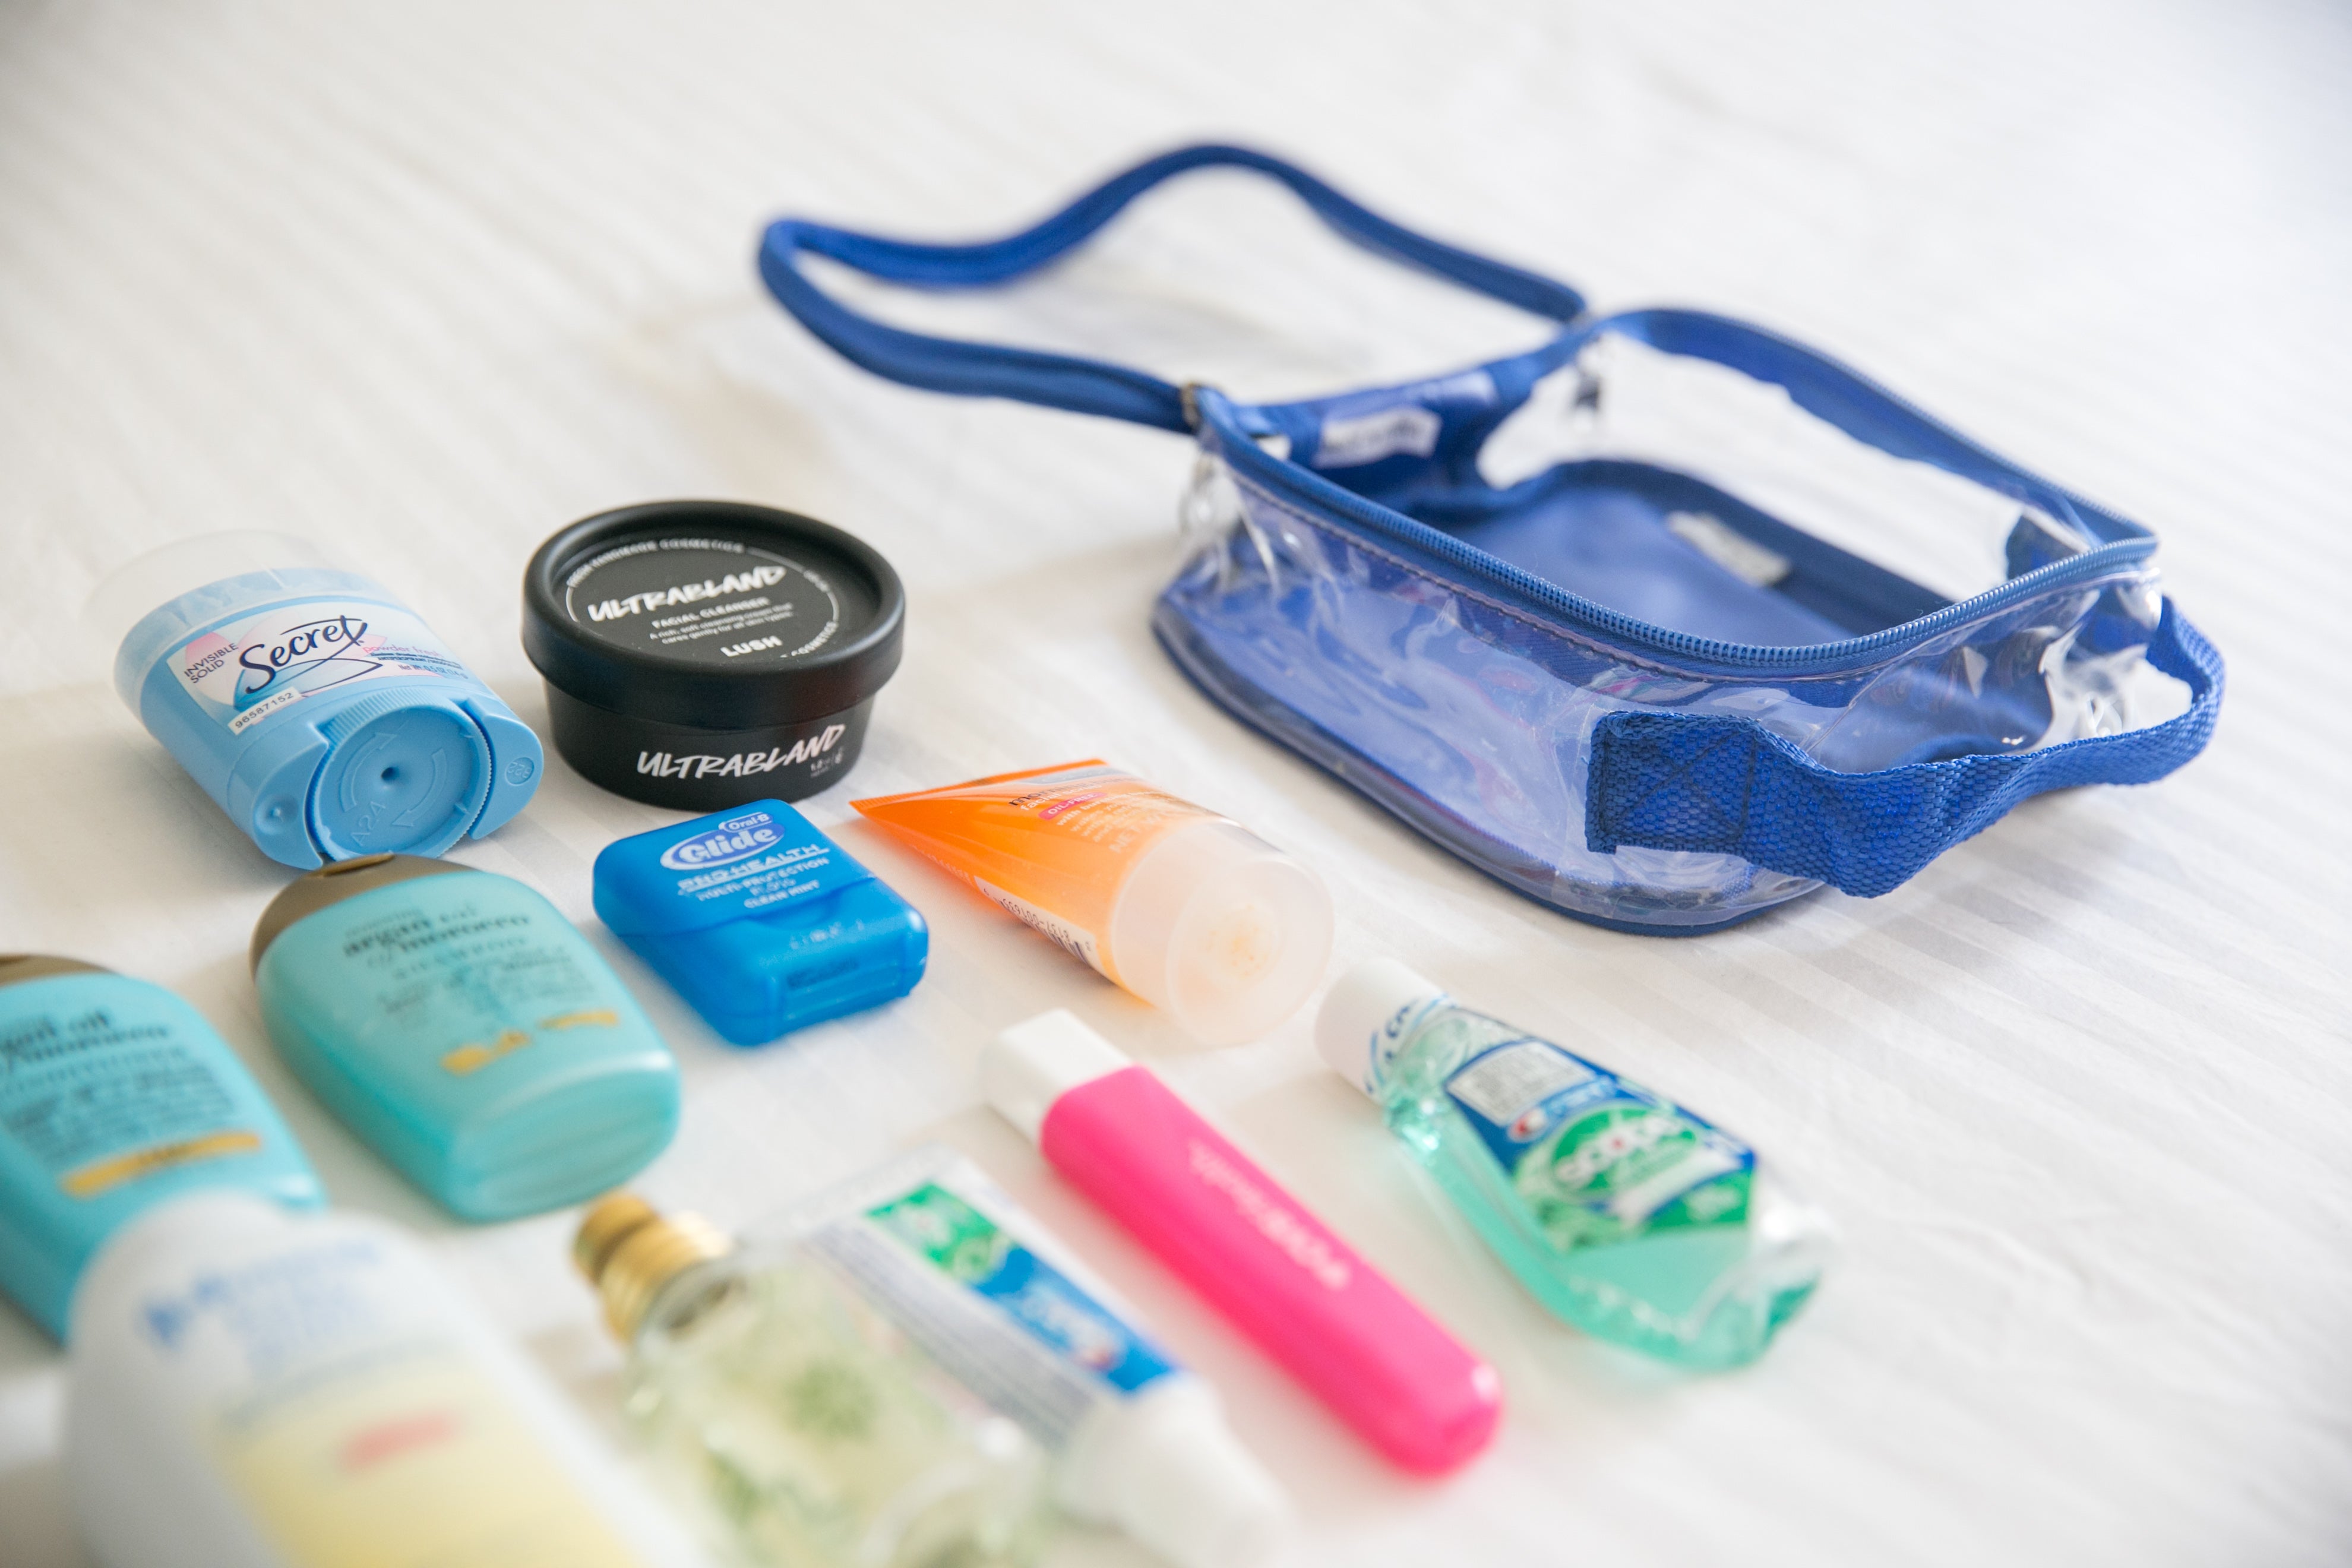 Packing toiletries for camping trip